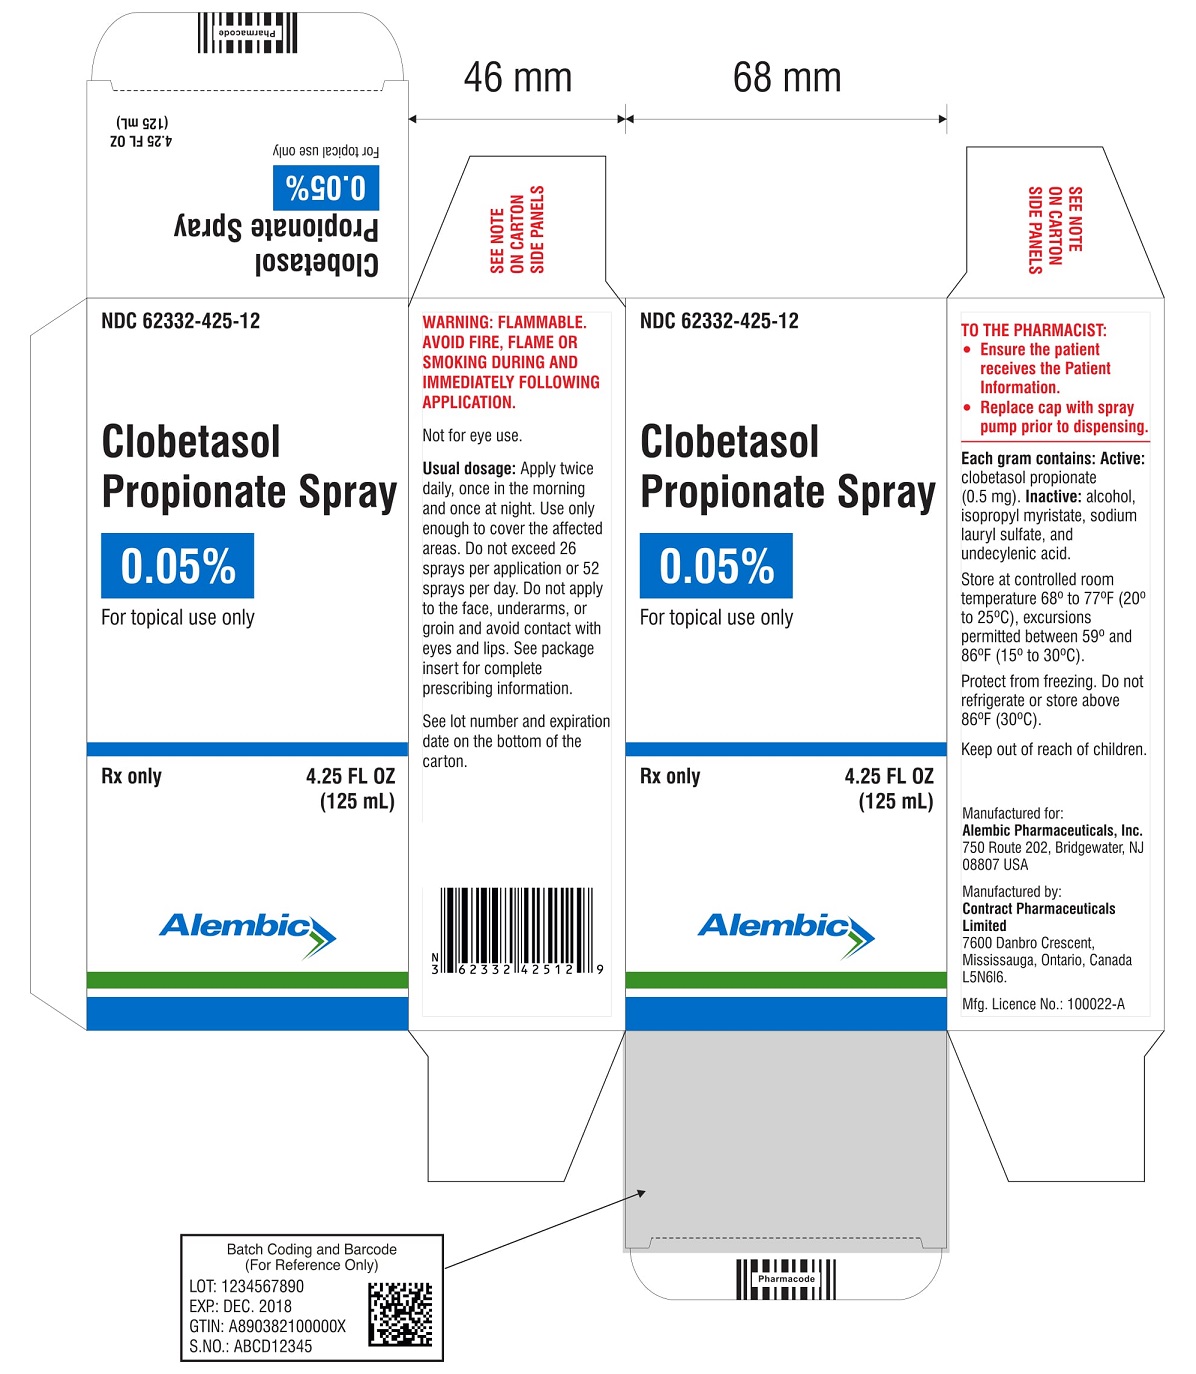 Rx Only 

NDC: <a href=/NDC/62332-425-12>62332-425-12</a>

Clobetasol Propionate

Spray

0.05%

For topical use only

4.25 FL OZ
					(125 mL)